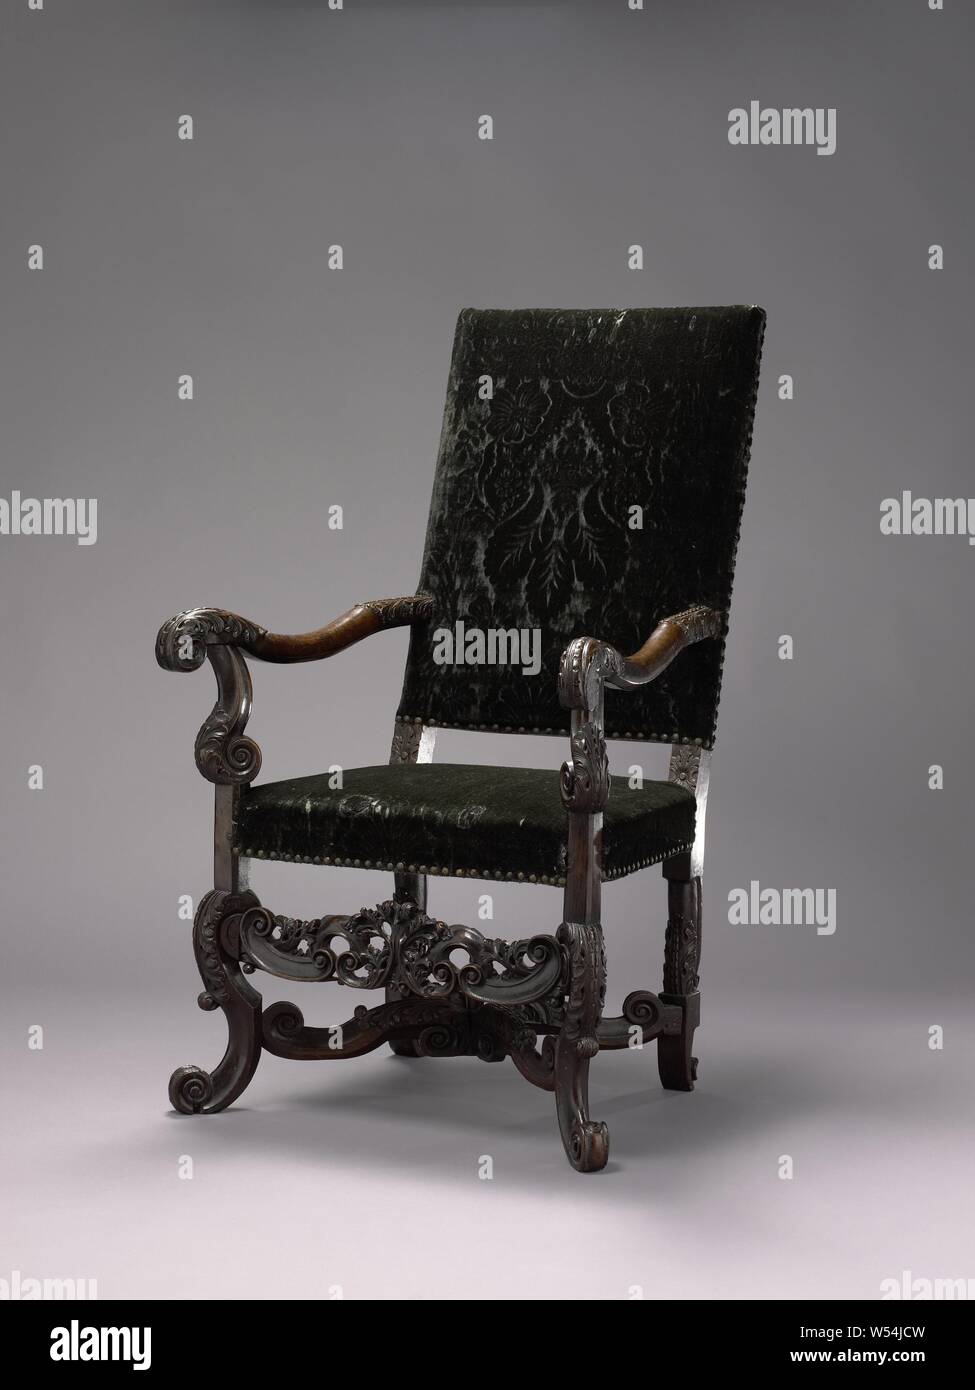 Armchair on angled front legs in the form of broken S-volutes, decorated with acanthus leaves. Back window rests on struts with rosettes, Armchair made of walnut. The furniture is upholstered and rests on angled front legs in the shape of broken S-volutes, decorated with acanthus leaves. The legs are connected by an X-shaped cross, also with broken S-volutes and acanthus leaf. The armrest struts are S-shaped, the armrests are slightly concave and end in a volute with acanthus leaf. The high back window rests on struts with rosettes., anonymous, Netherlands (possibly), c. 1695 - c. 1705, wood Stock Photo